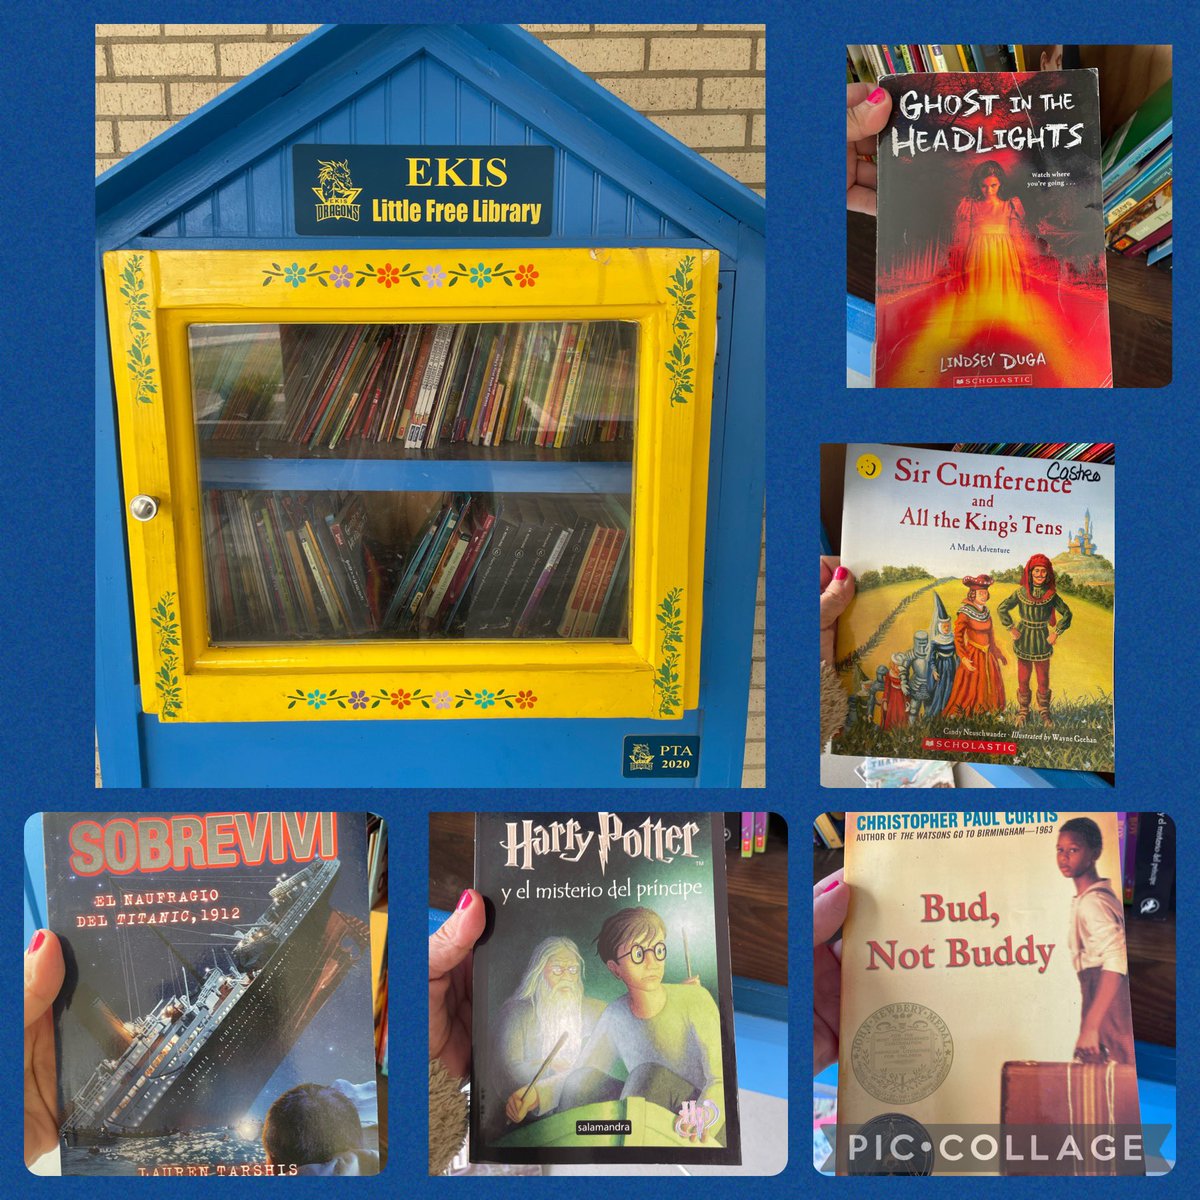 Discover treasures between the pages! Swing by our little free library to discover your favorite new book! @EastwoodKnolls 🐉📚